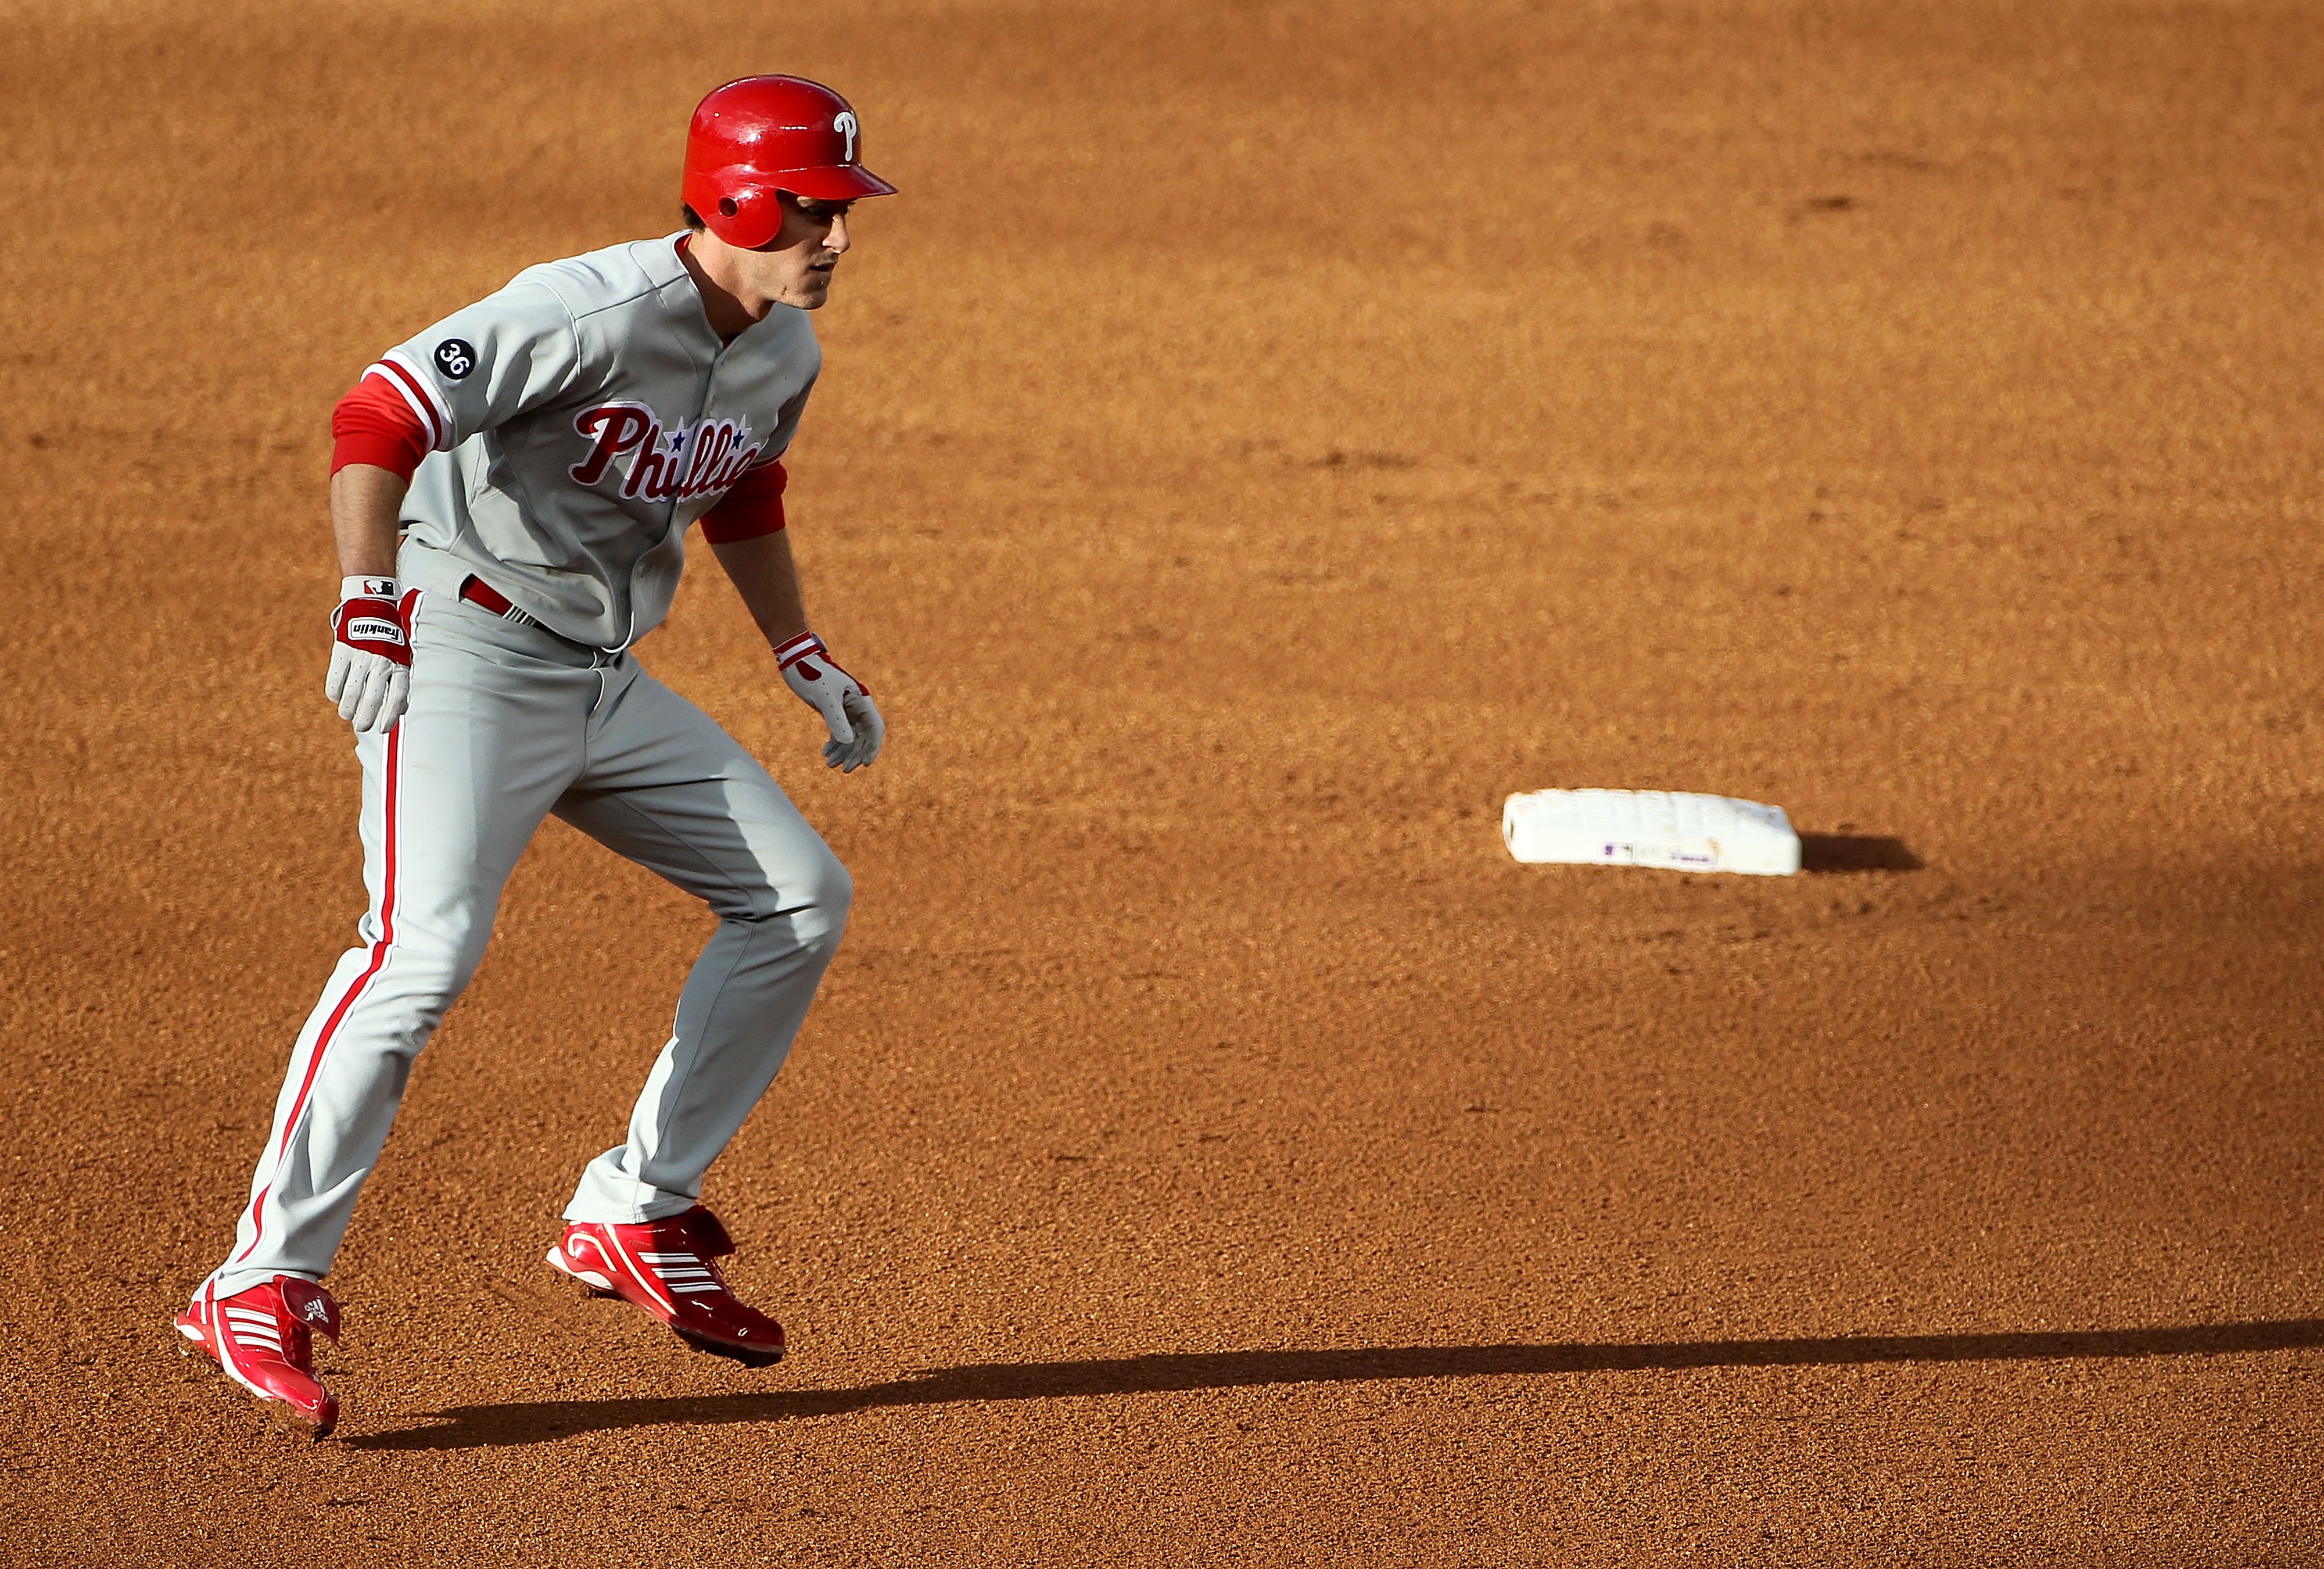 Philadelphia Phillies legend Chase Utley and the Hall of Fame